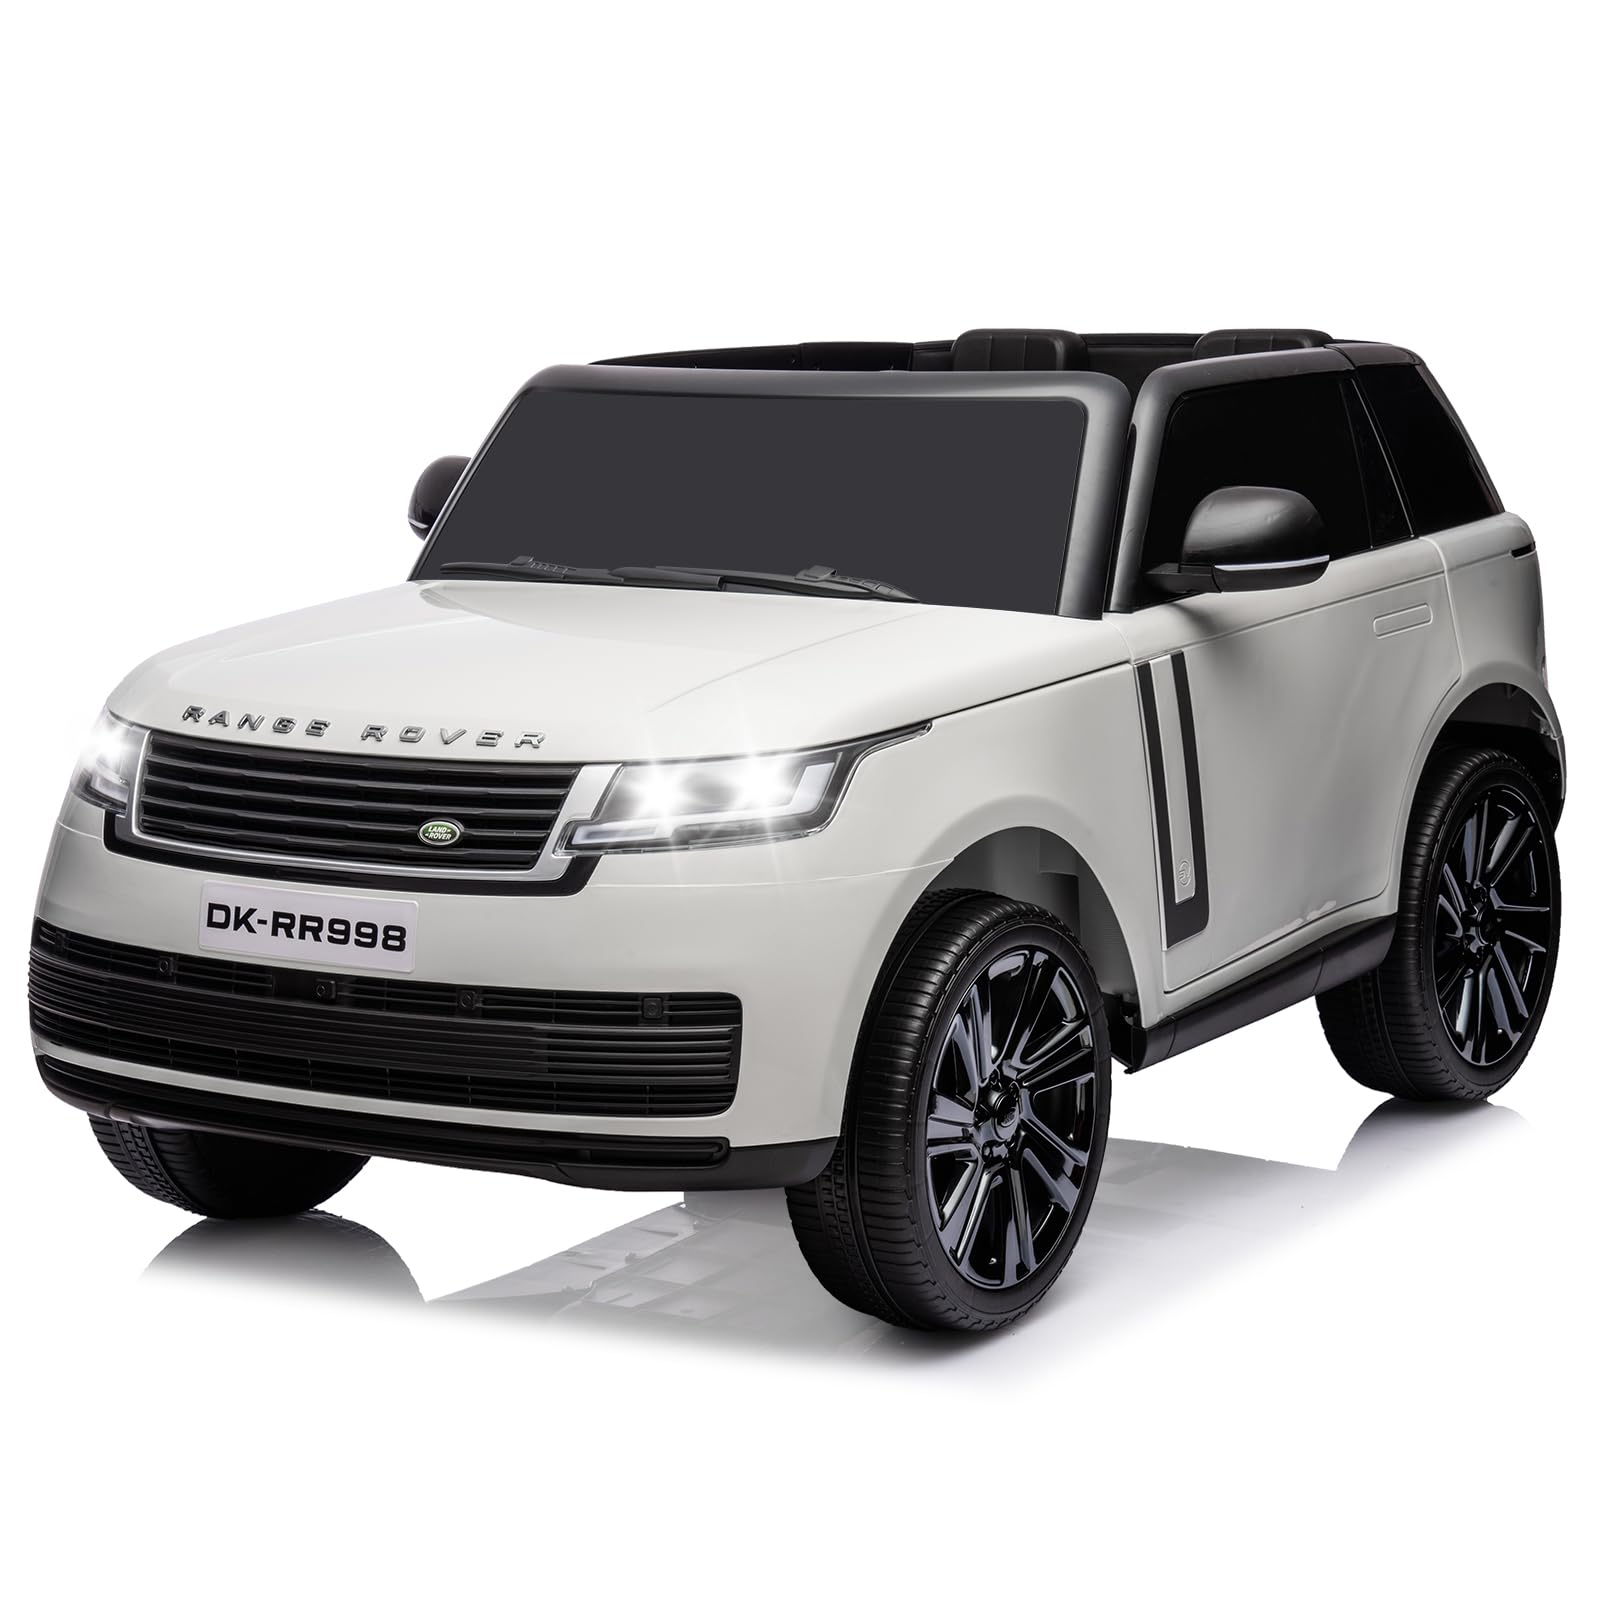 24V Land Rover Ride On Car, 2-Seater, MP3 Player, 3 Speeds